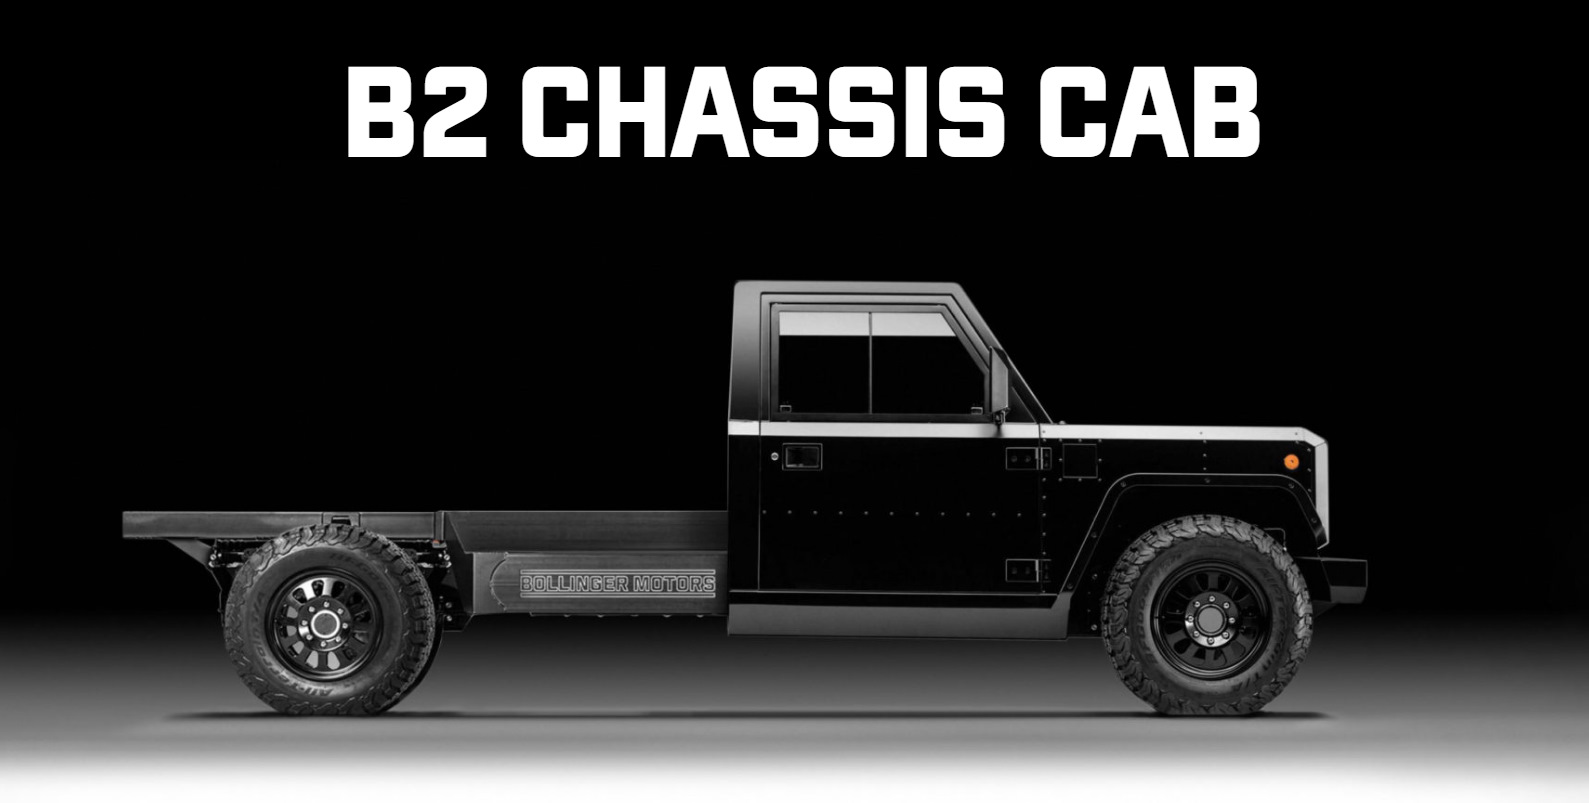 2021. Bollinger B2 Chassis Cab